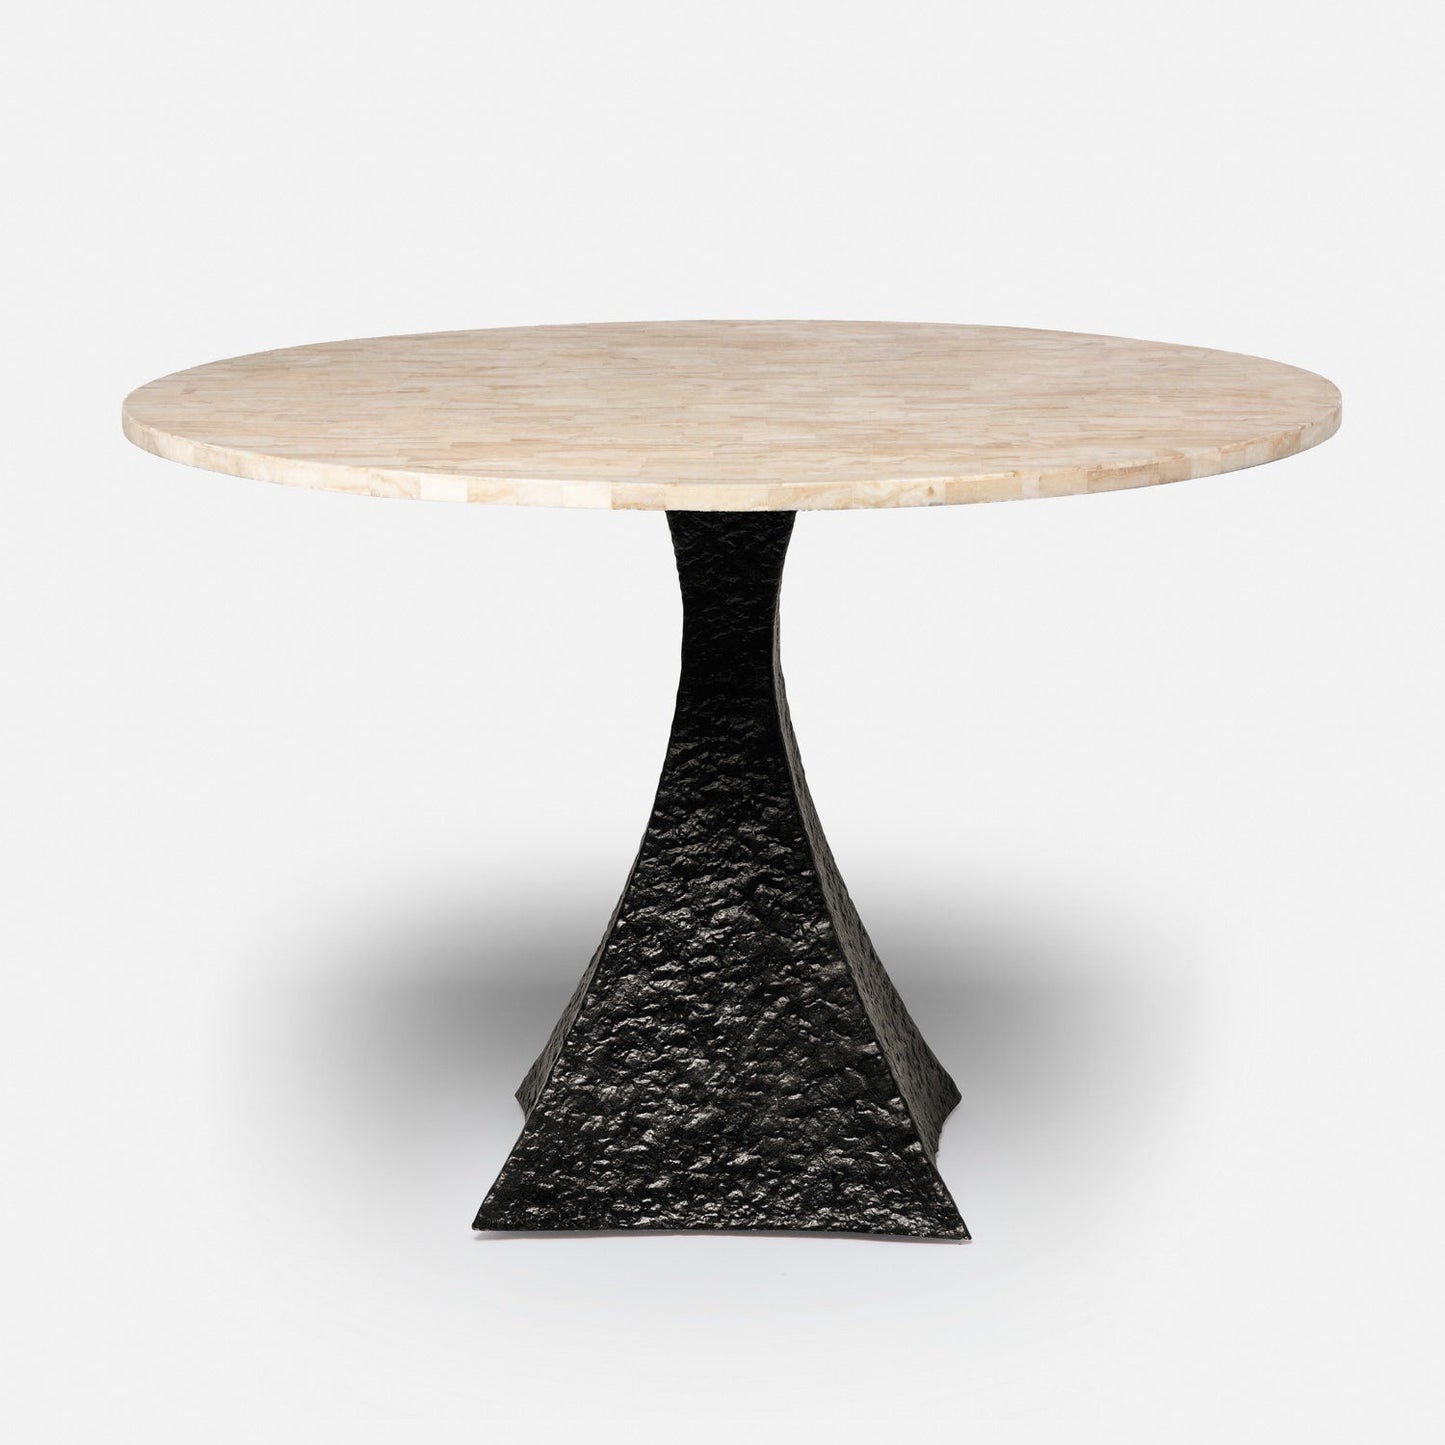 Made Goods Noor 54" x 30" Bumpy Black Iron Dinning Table With Round Beige Crystal Stone Table Top